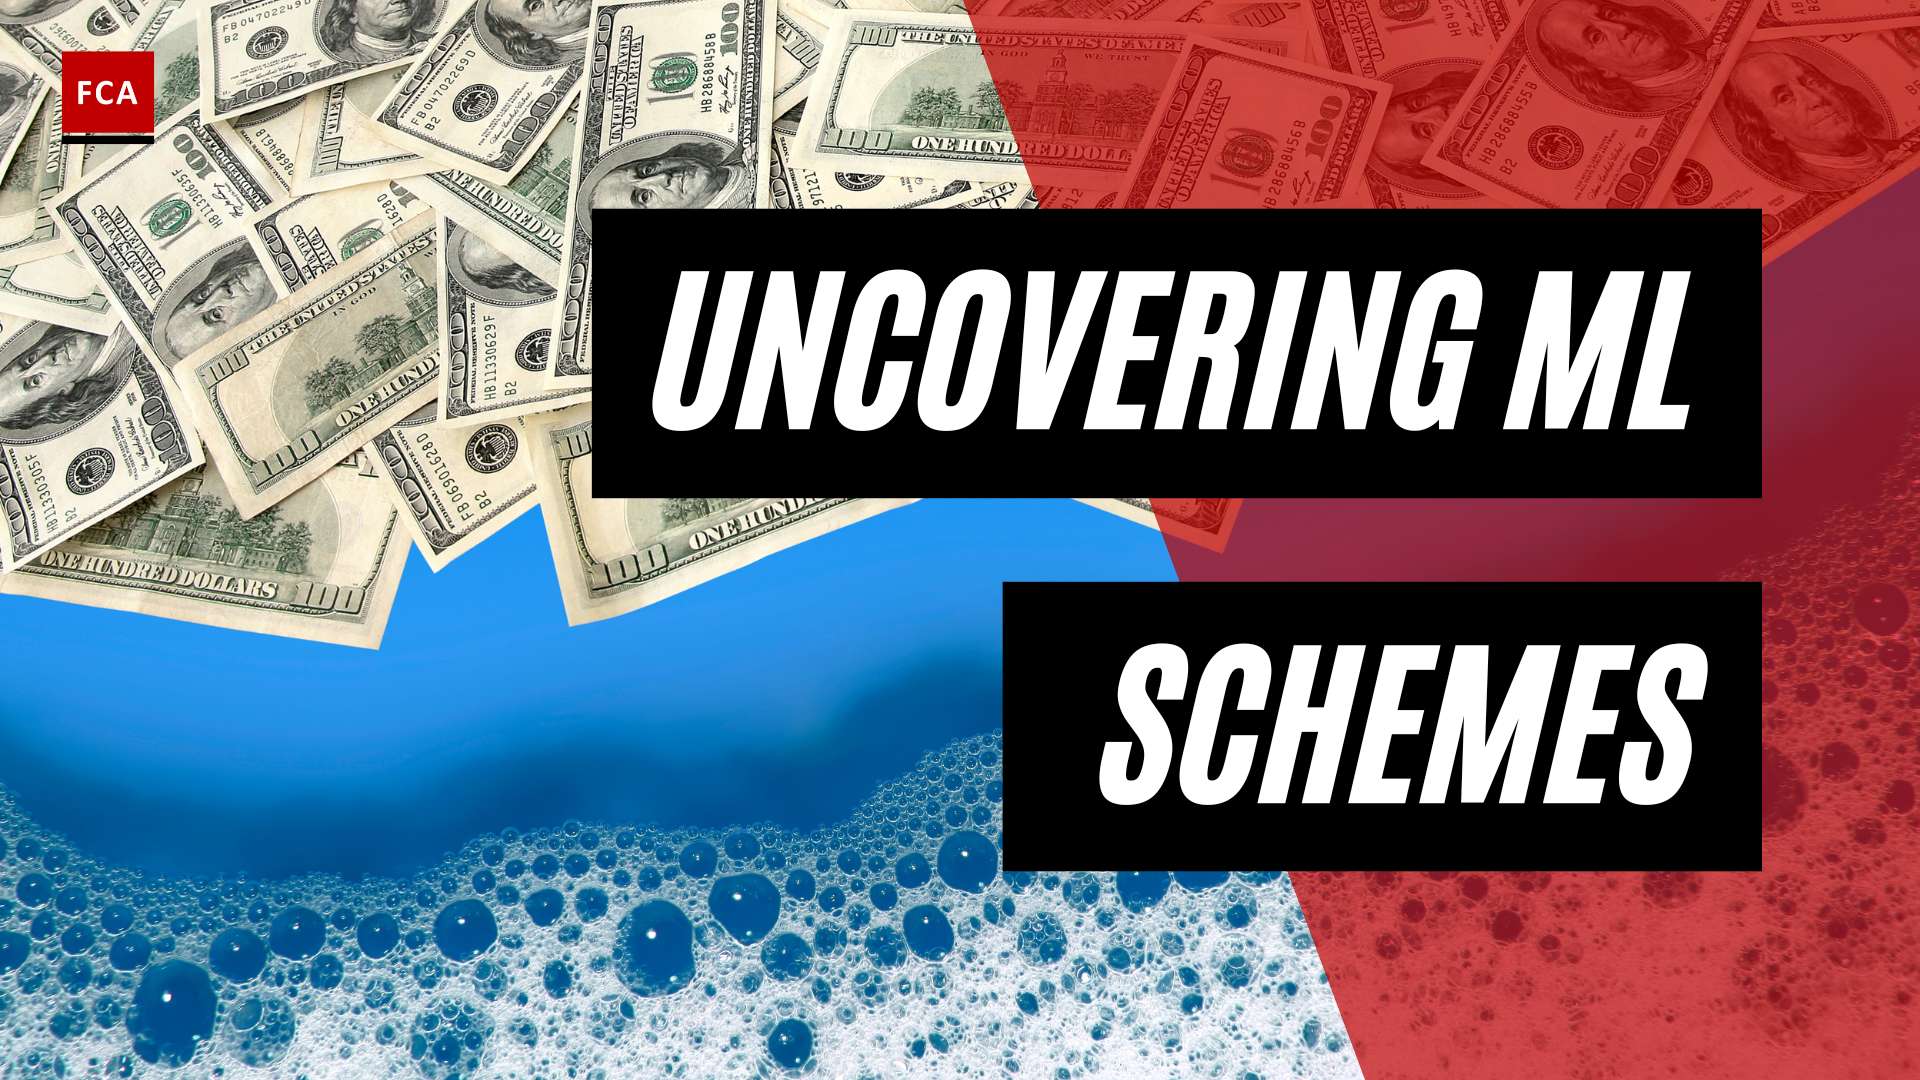 Behind The Scenes: Uncovering Money Laundering Schemes